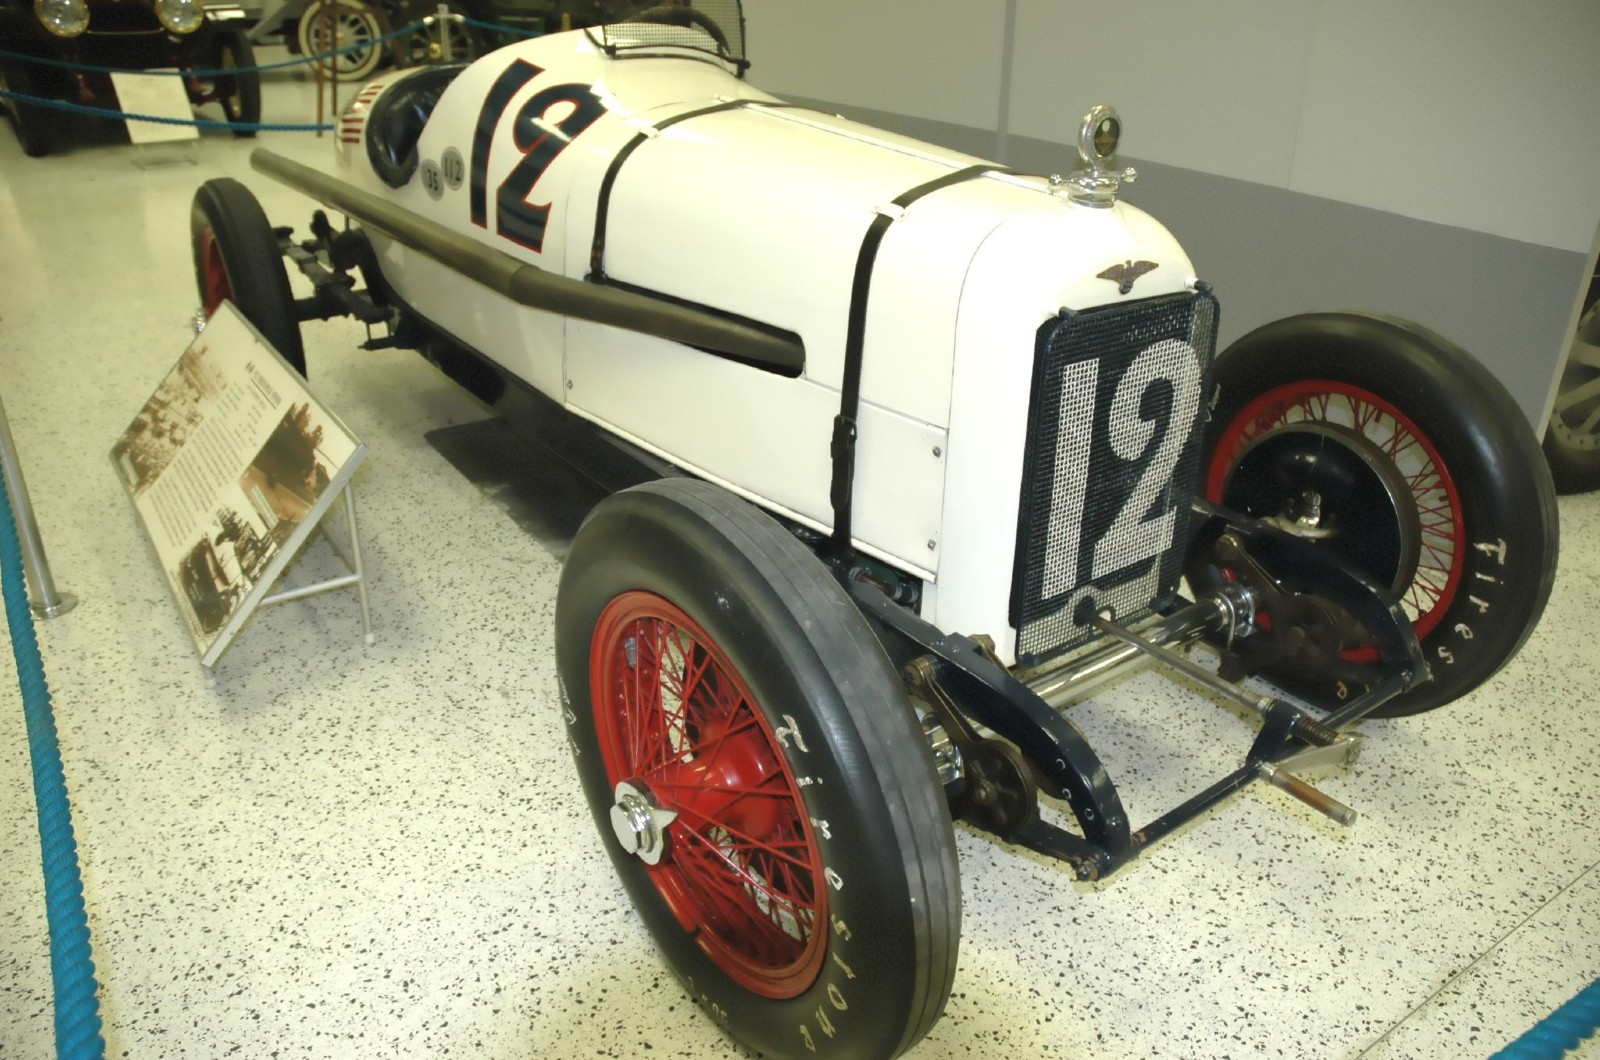 <p>The Duesenberg 183 made history in 1921 as the first American vehicle to win a European Grand Prix. This would be an achievement unmatched by any American team until Dan Gurney’s successful race in 1967.</p><p>The car was powered by an inline eight-cylinder engine producing 114 horsepower, but the standout feature of the Duesenberg 183 was its four-wheel hydraulic brakes, which provided a competitive edge. The same year it secured its historic Grand Prix victory, the Duesenberg also placed second, fourth, sixth, and eighth place in Indianapolis.</p>